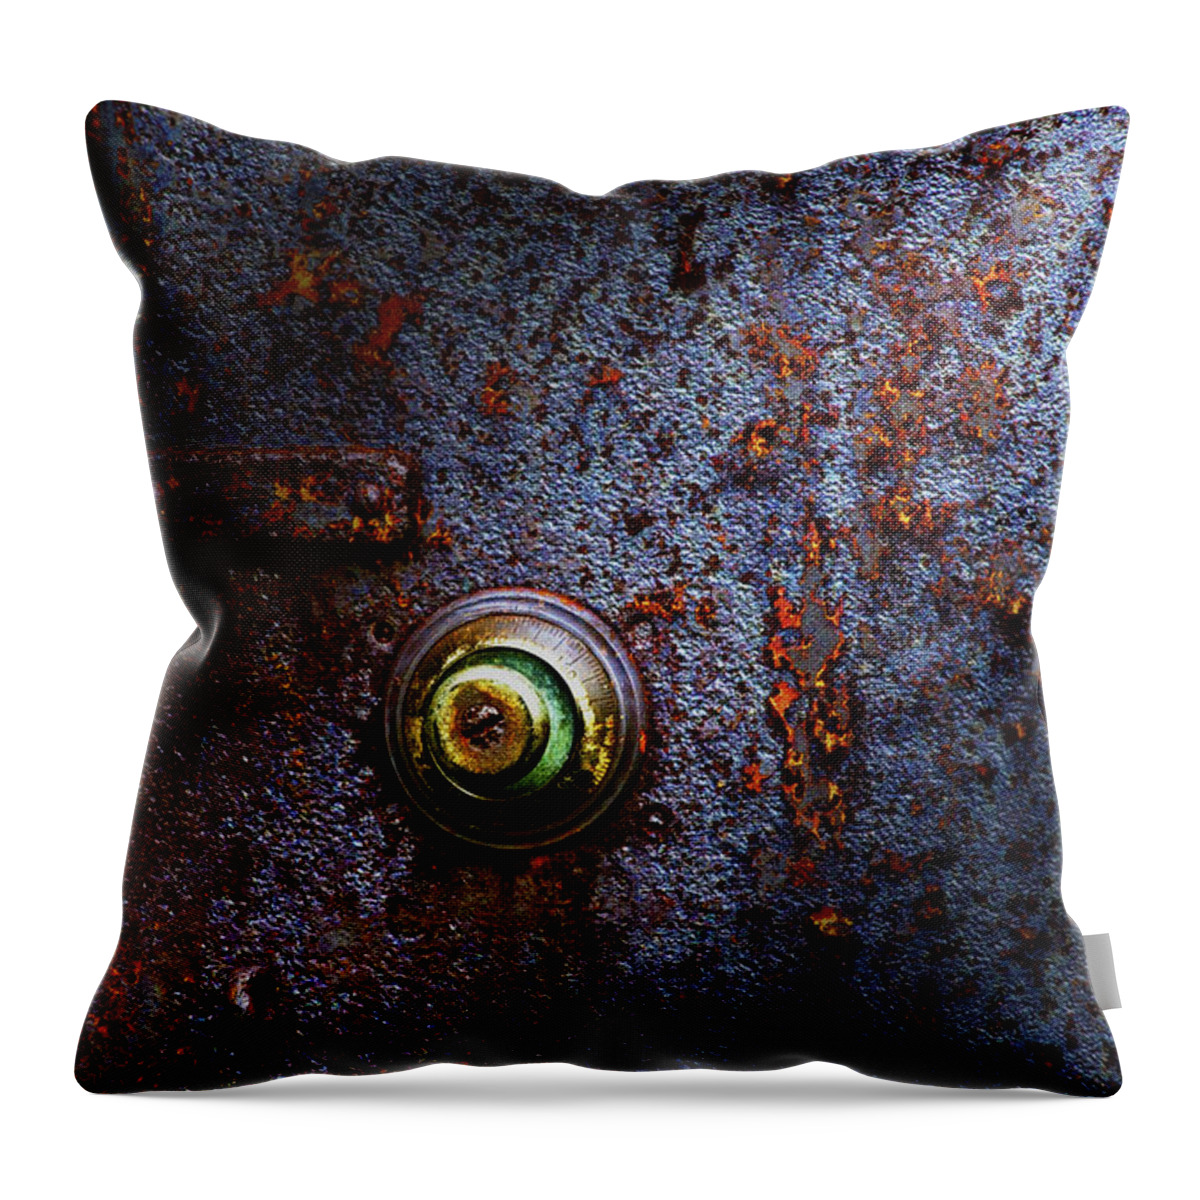 Abstract Throw Pillow featuring the photograph Ancient Entry by Tom Mc Nemar